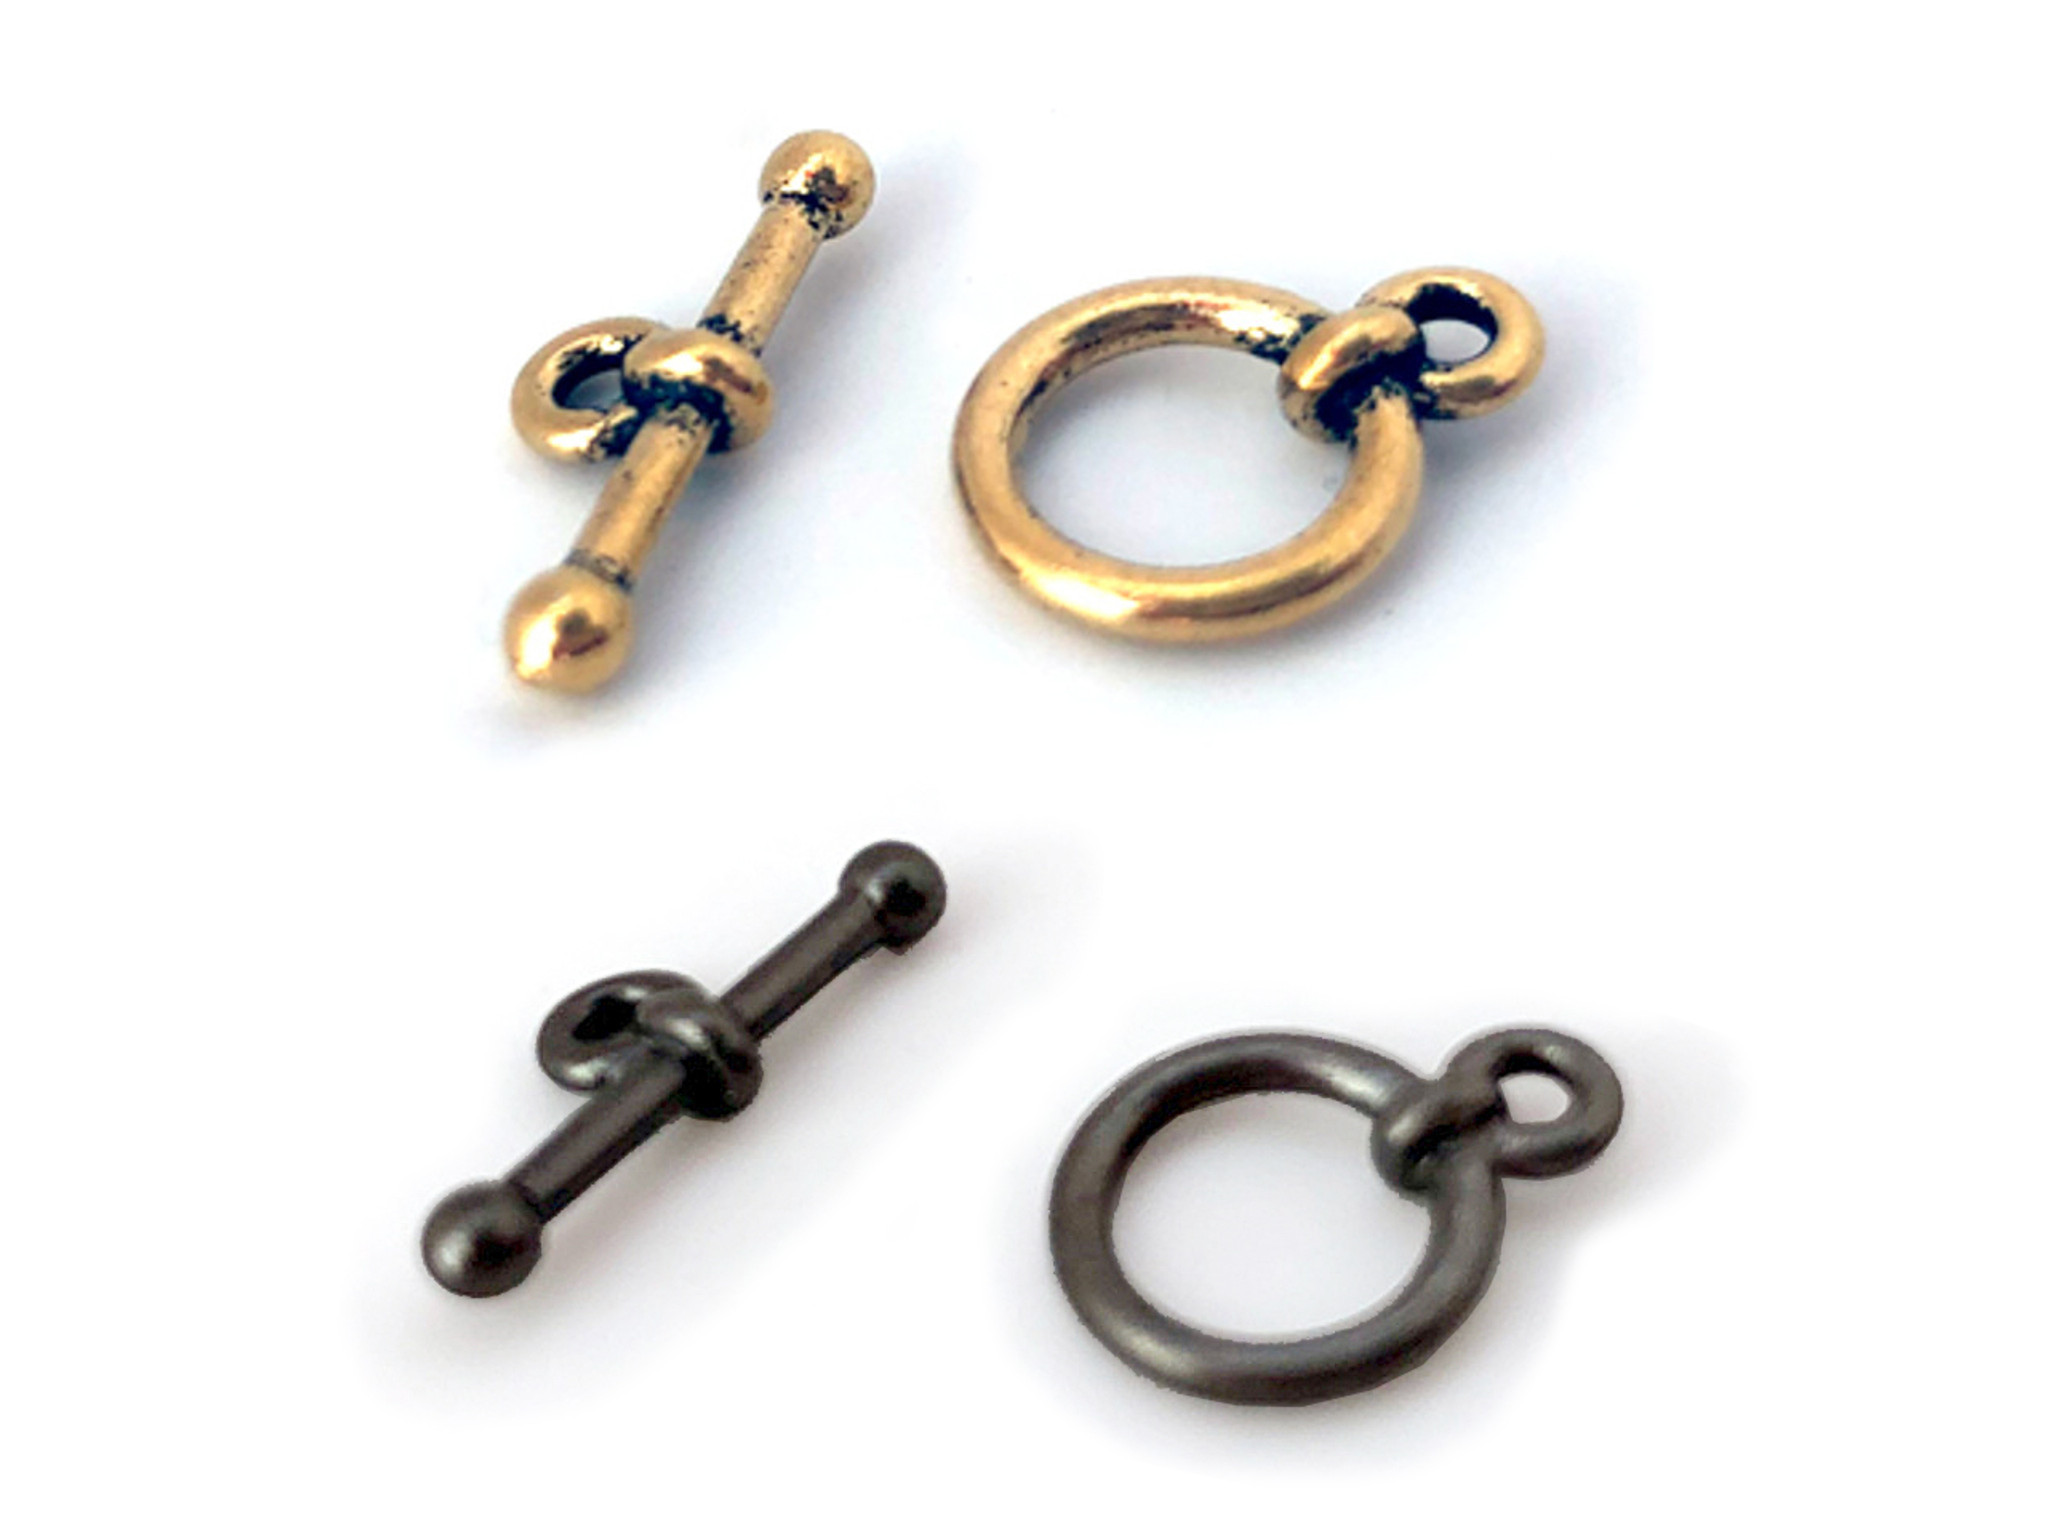 10mm Anna's Clasps for Handcrafted Jewelry Making - Soft Flex Company